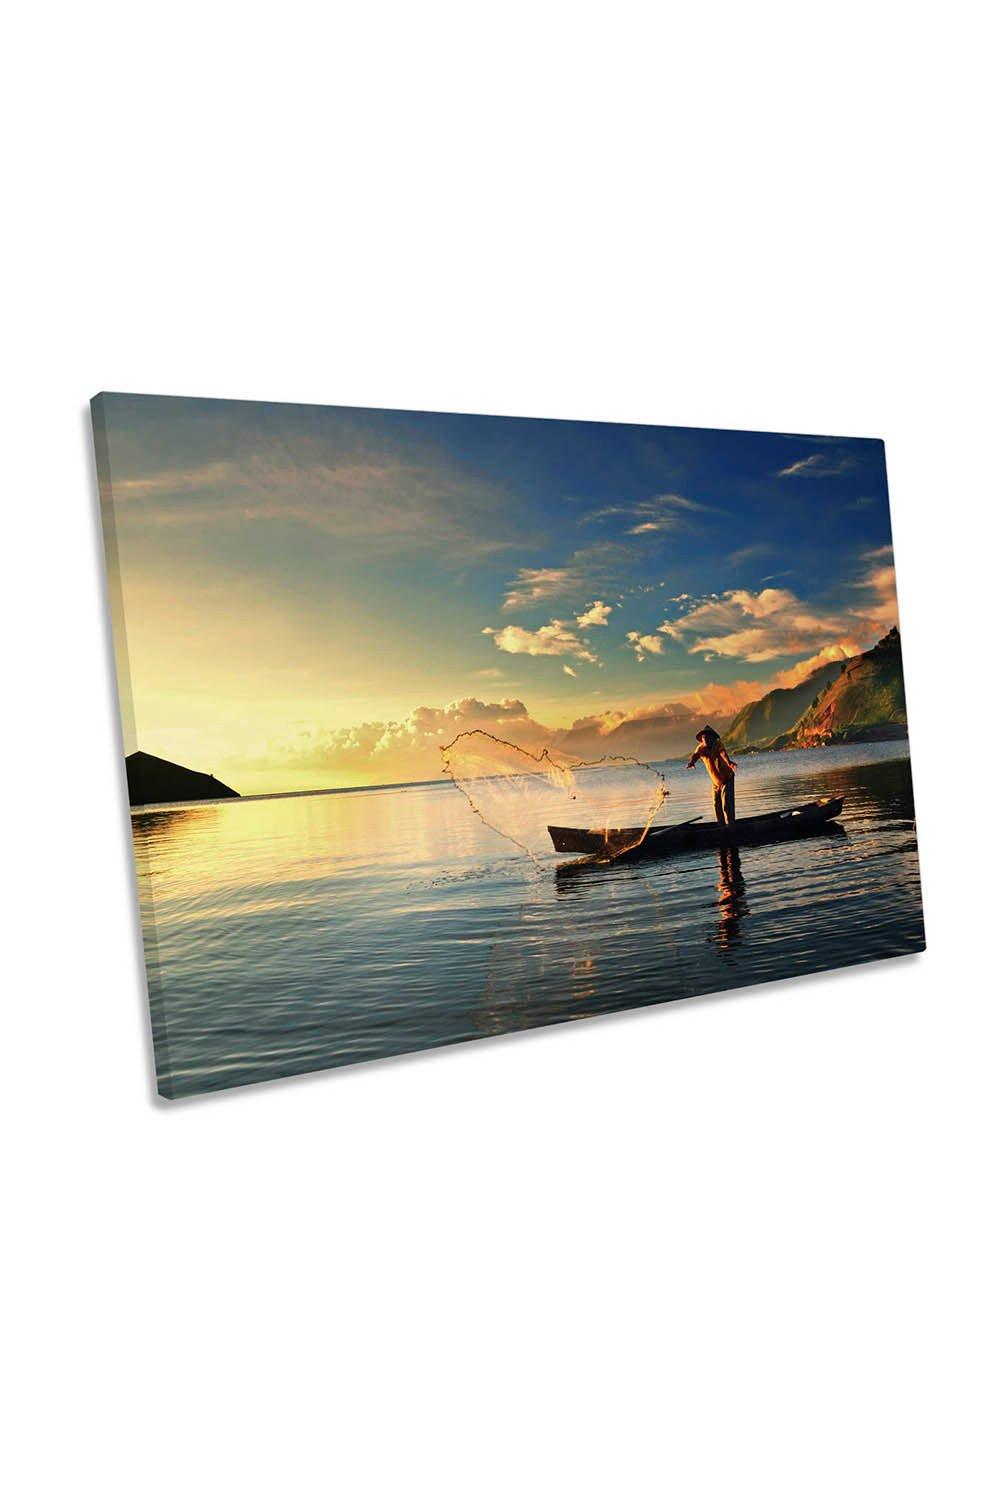 Morning Strike Fishing Asia Sunset Canvas Wall Art Picture Print